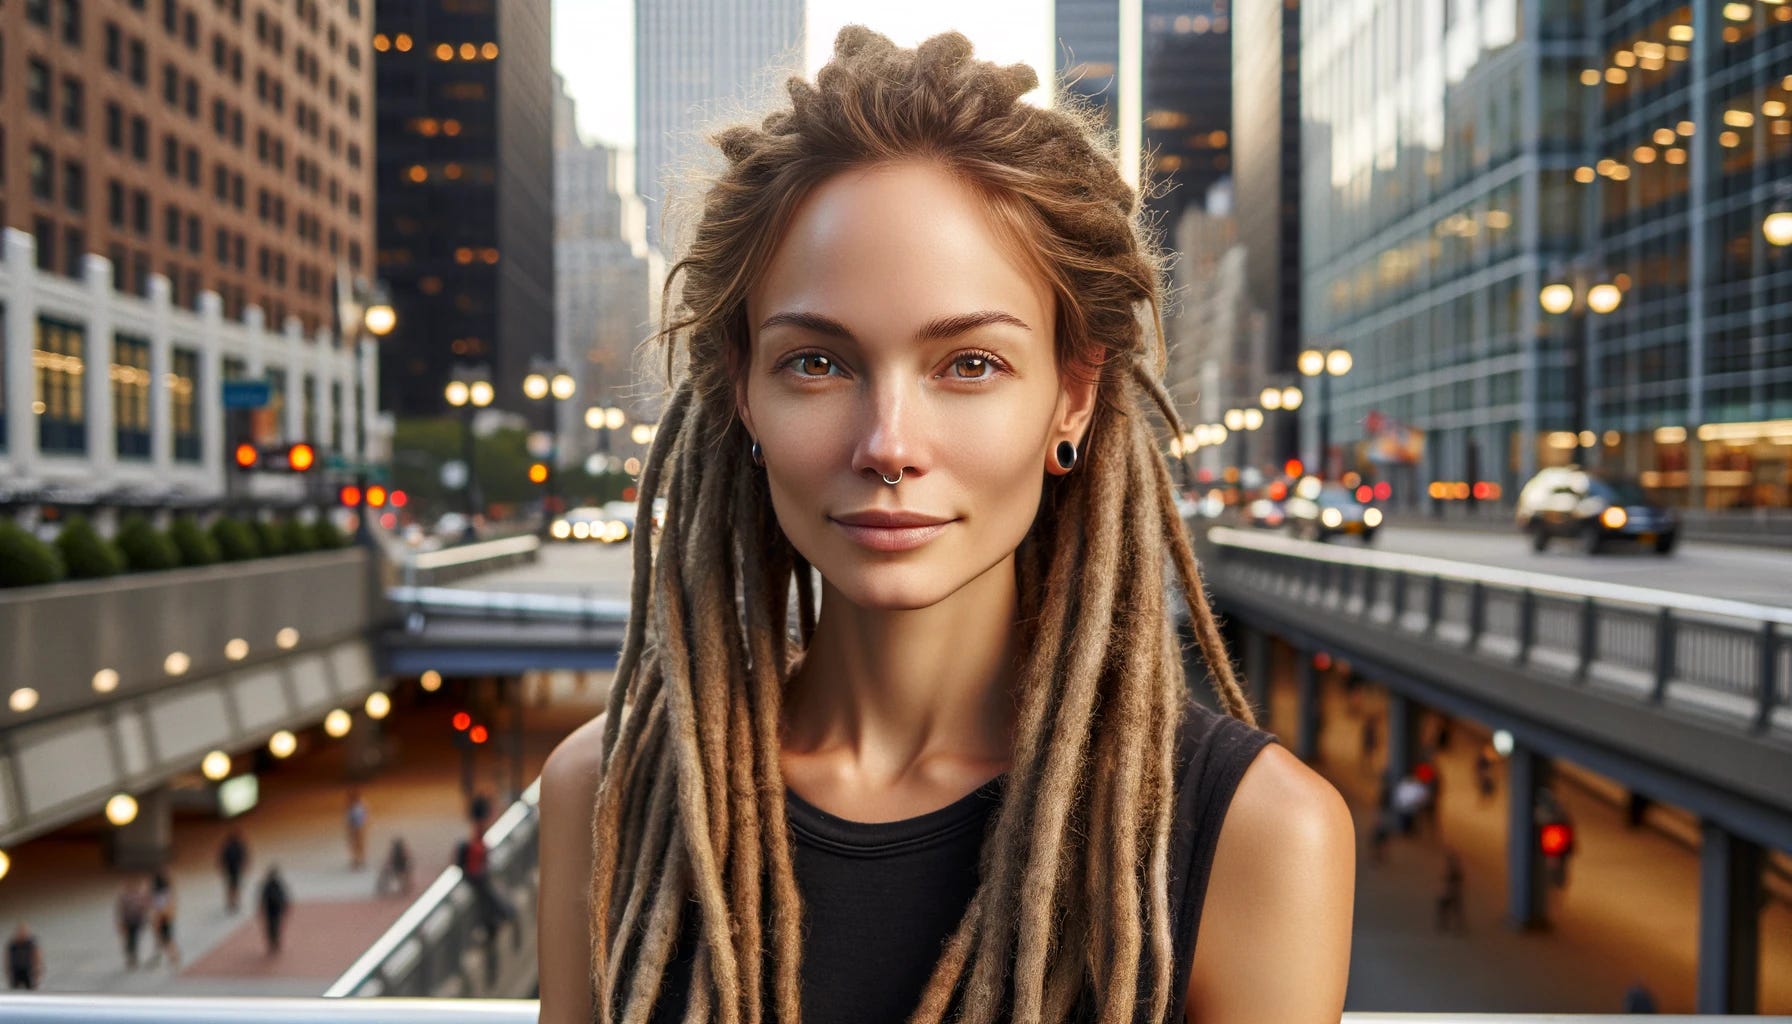 A portrait of a white woman with dreadlocks in an urban setting. She has a relaxed and confident expression. Her dreadlocks are stylishly draped over her shoulders. The background features a bustling city street with modern buildings, streetlights, and a hint of distant cityscape. The urban environment contrasts with her earthy appearance. The lighting is a mix of natural sunlight and the artificial glow from the city, creating an interesting interplay of shadows and highlights on her face.